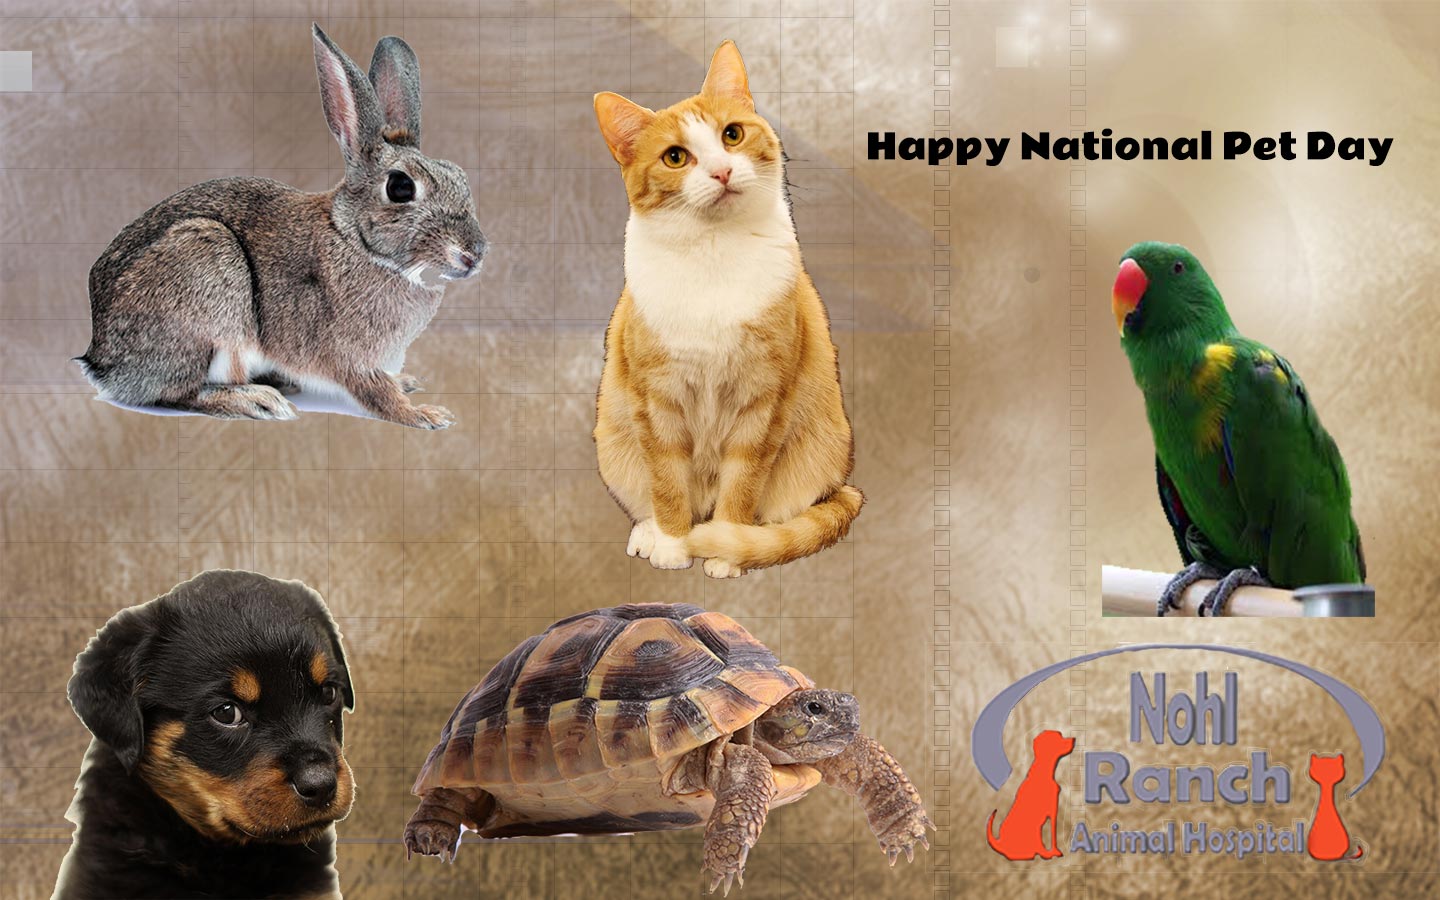 Nohl Ranch Animal Hospital Veterinarian in Orange, CA blog | Happy National Pet Day | Adopt a pet on April 11 and get a free office Exam and a Free first round of vaccination.